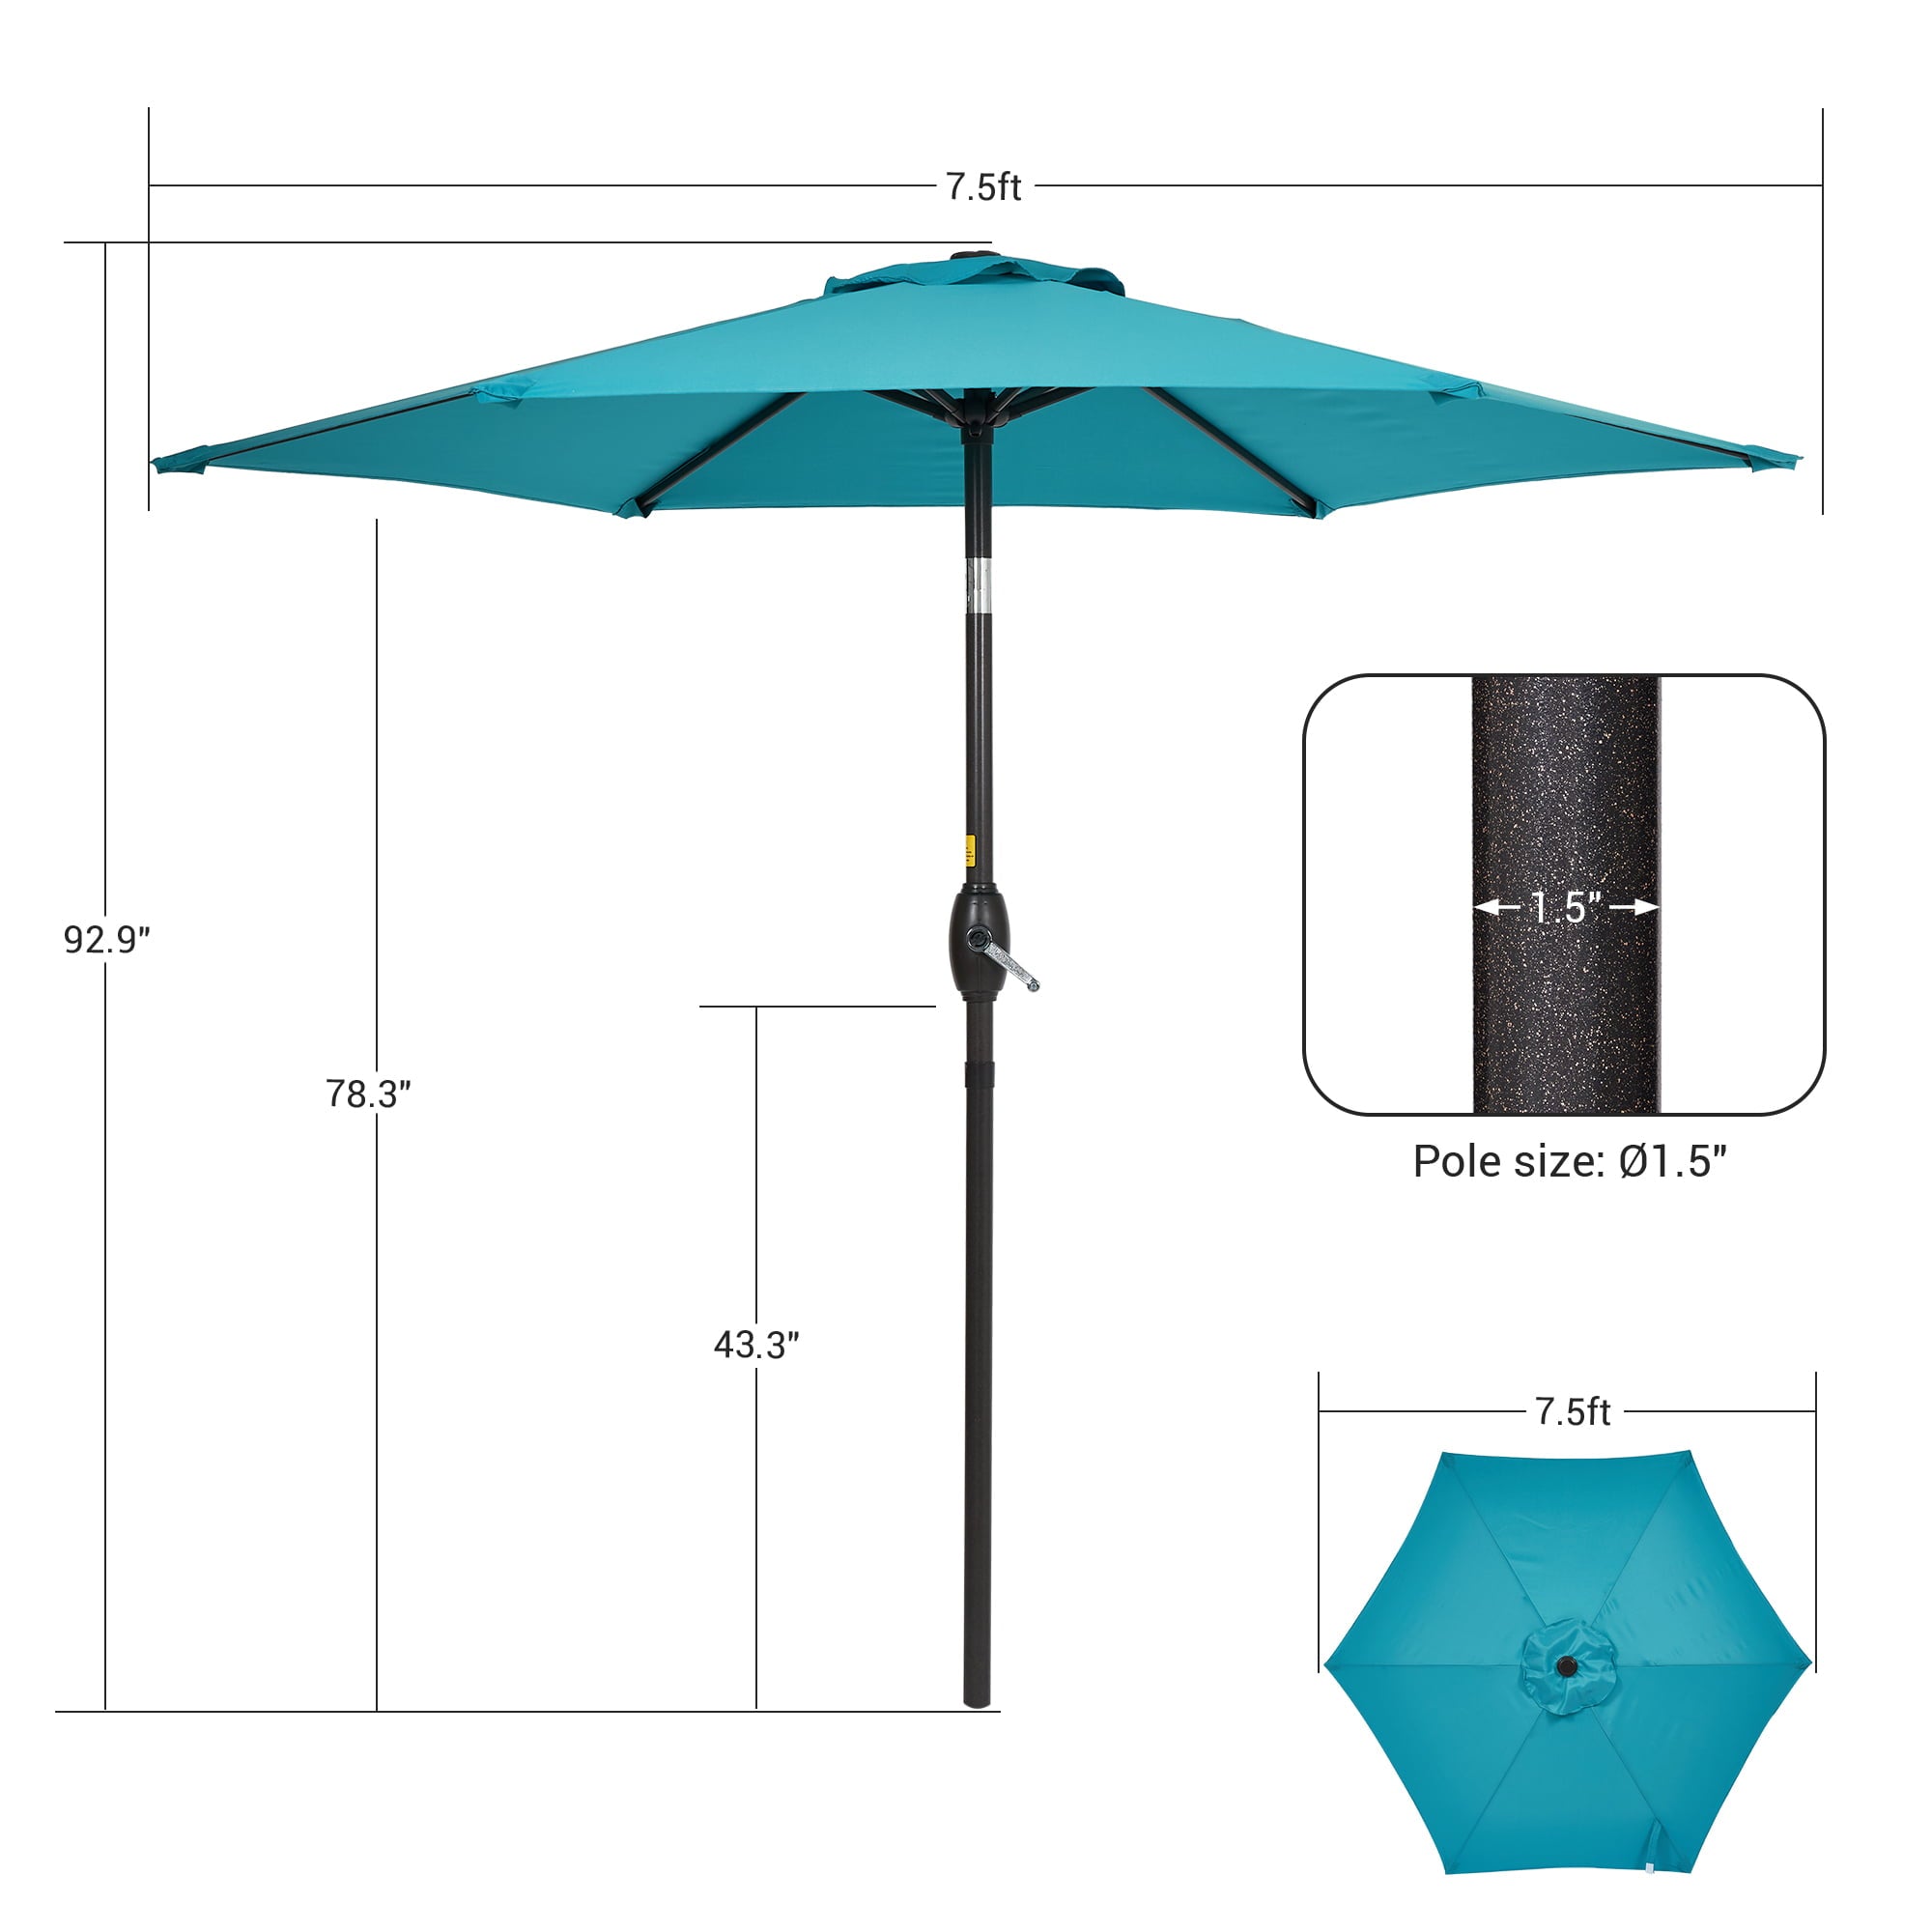 Sonerlic 7.5ft Round Patio Market Umbrella with Steel Frame, Outdoor Table Umbrella for Yard, Poolside and Deck, Turquoise